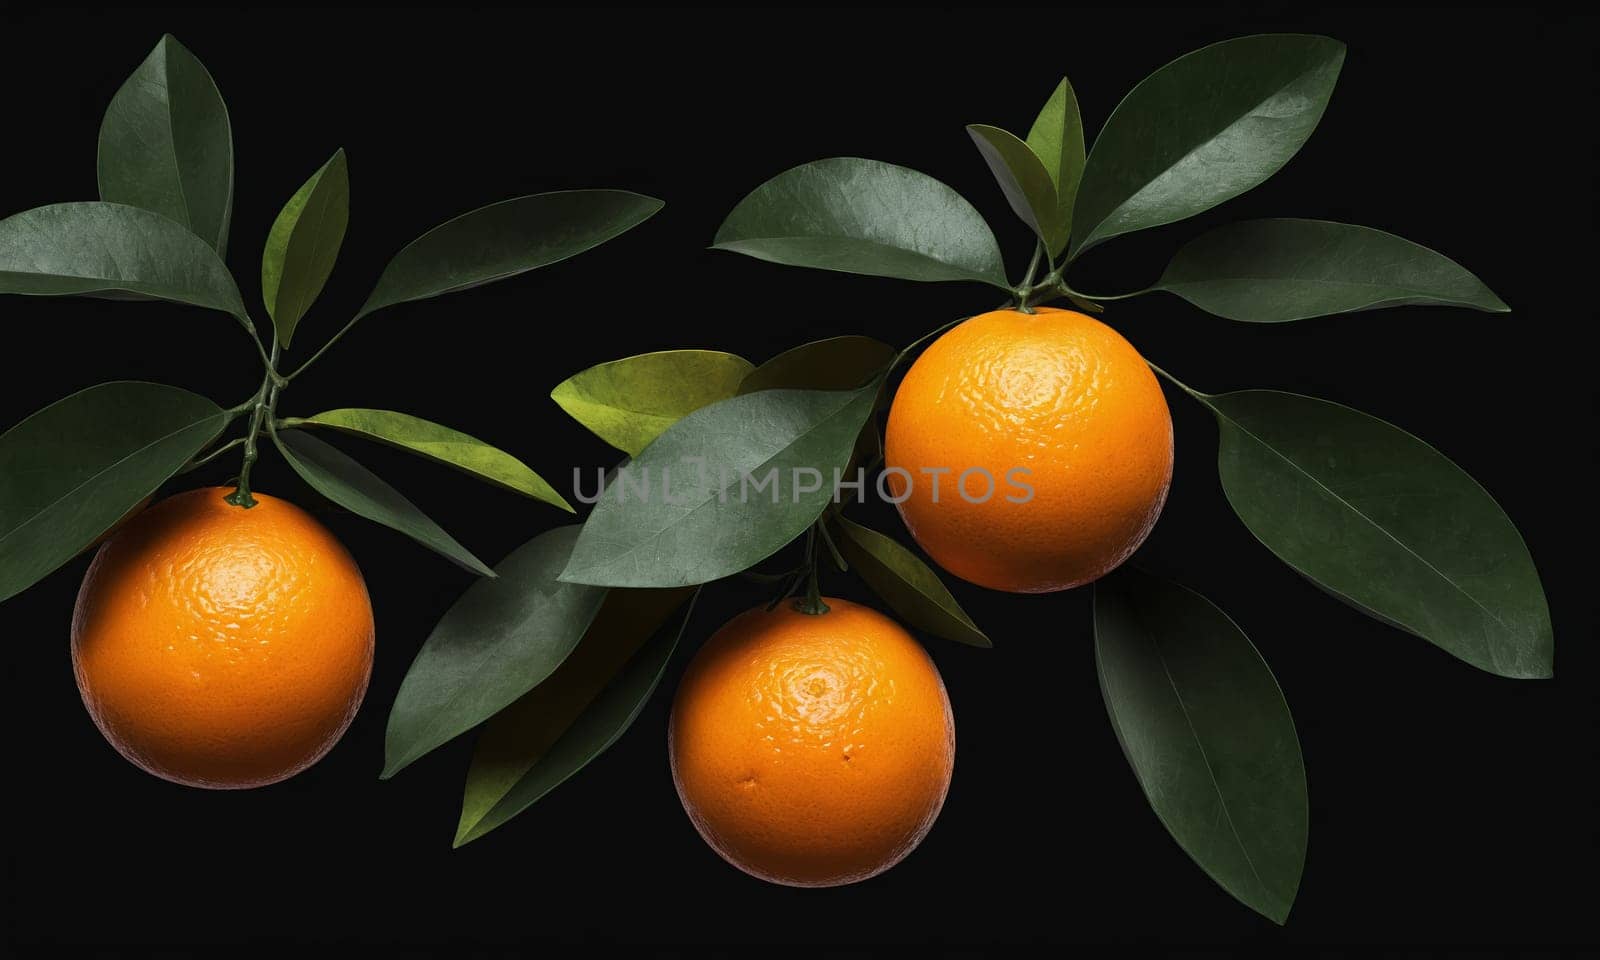 A seamless pattern featuring oranges with green leaves on a black background. by Andre1ns